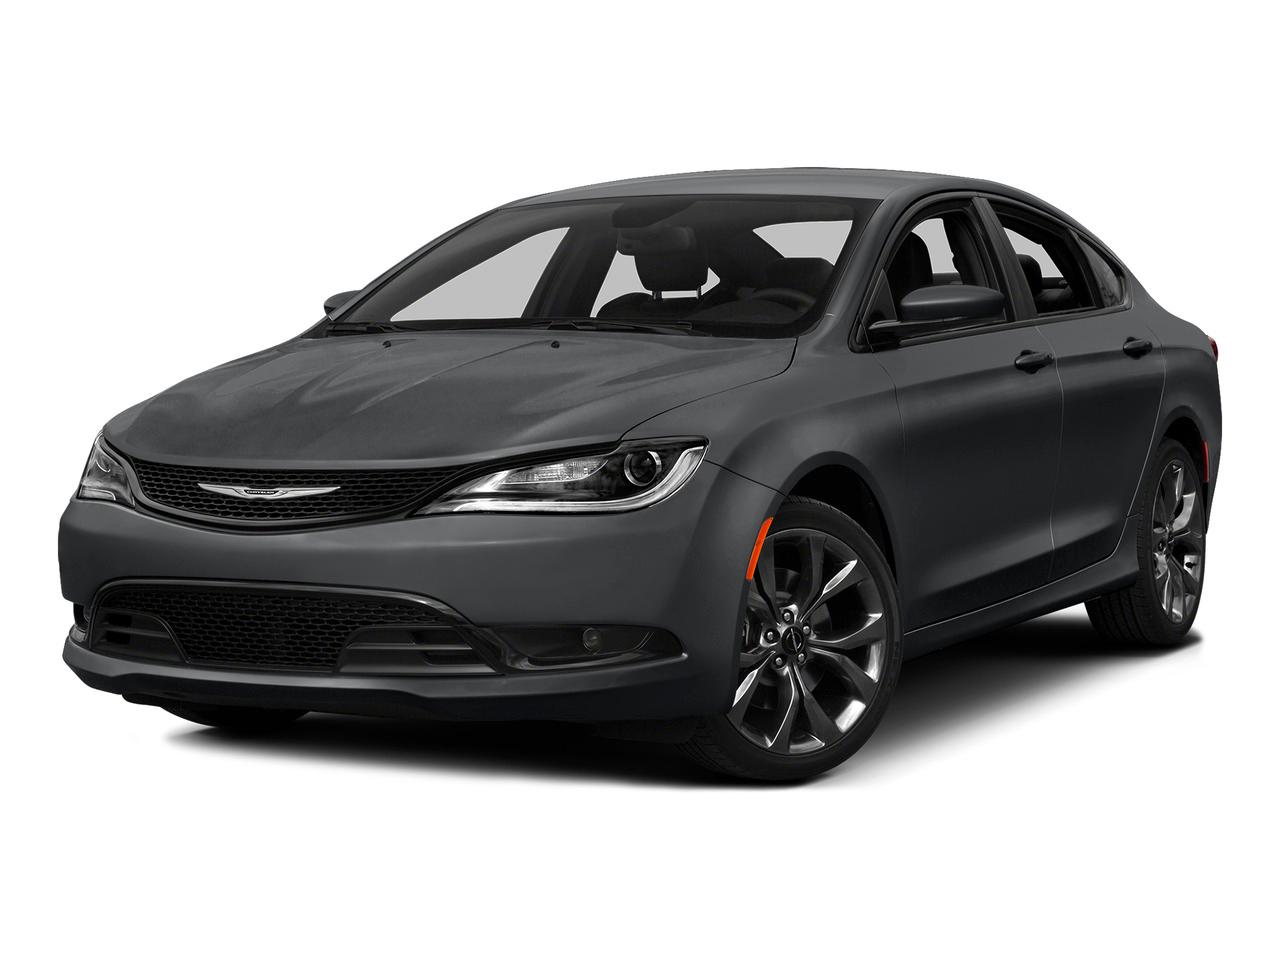 2015 Chrysler 200 Vehicle Photo in BOONVILLE, IN 47601-9633